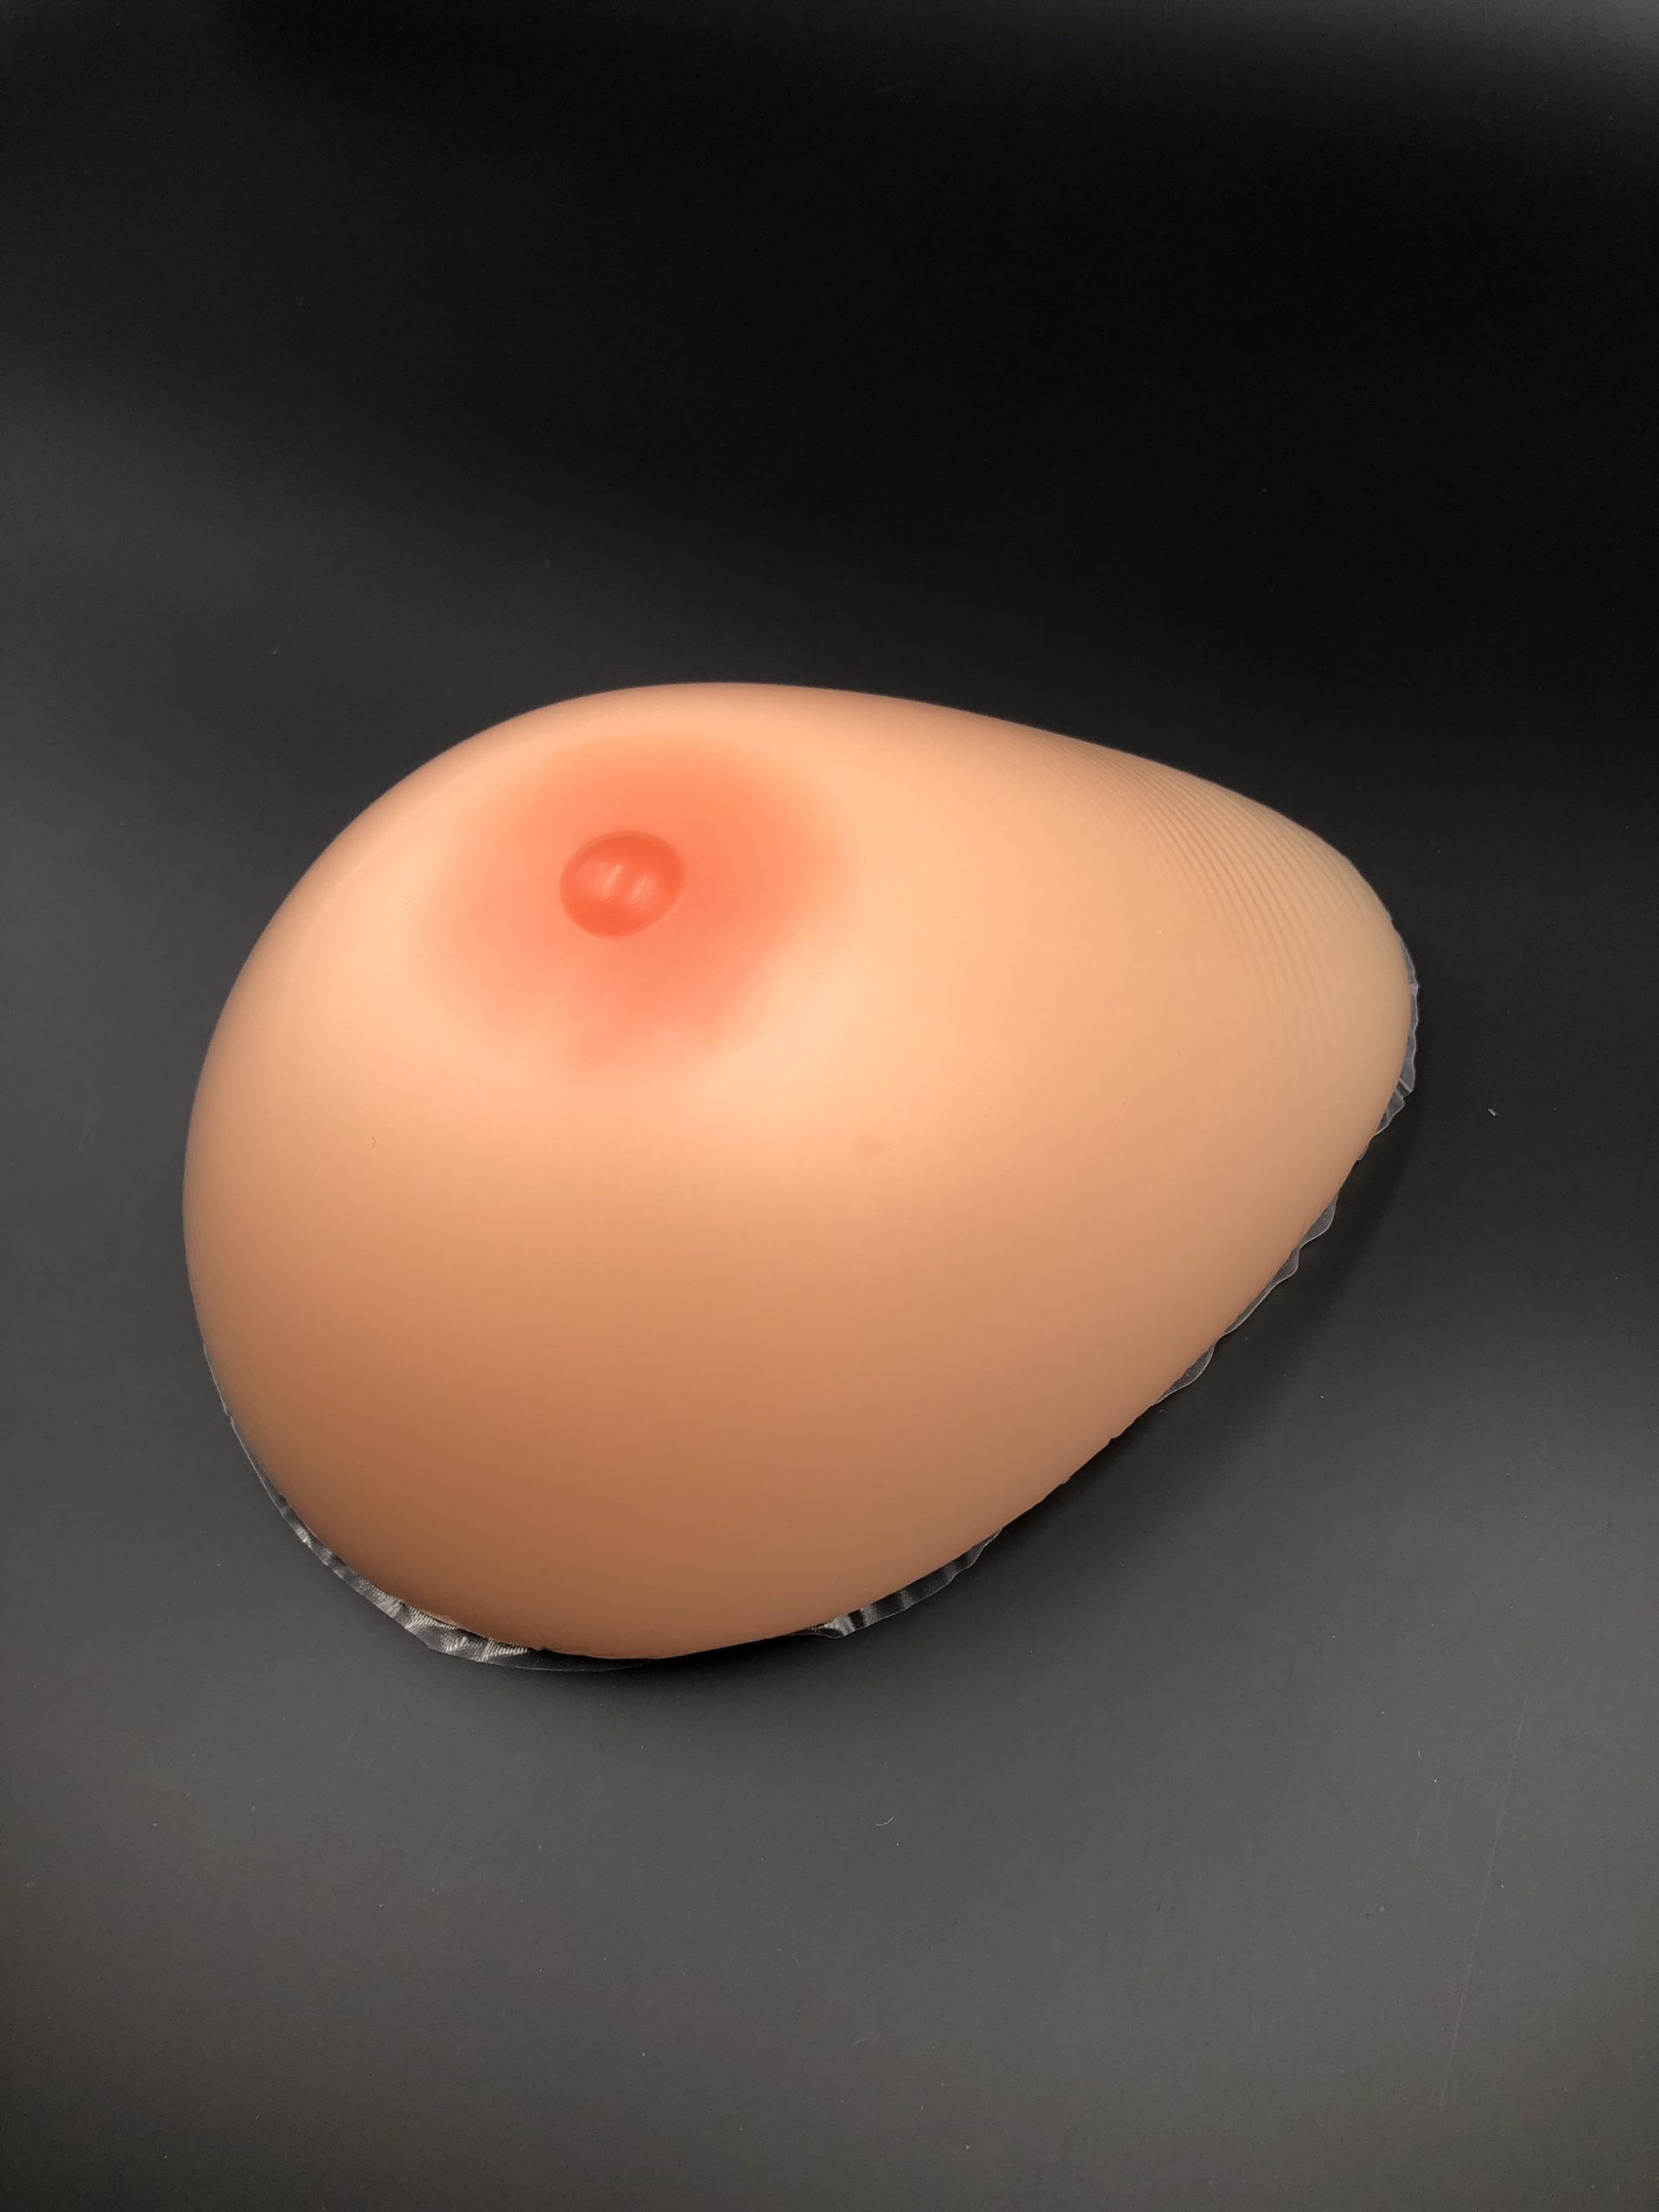 How To Make Your Own Breast Forms